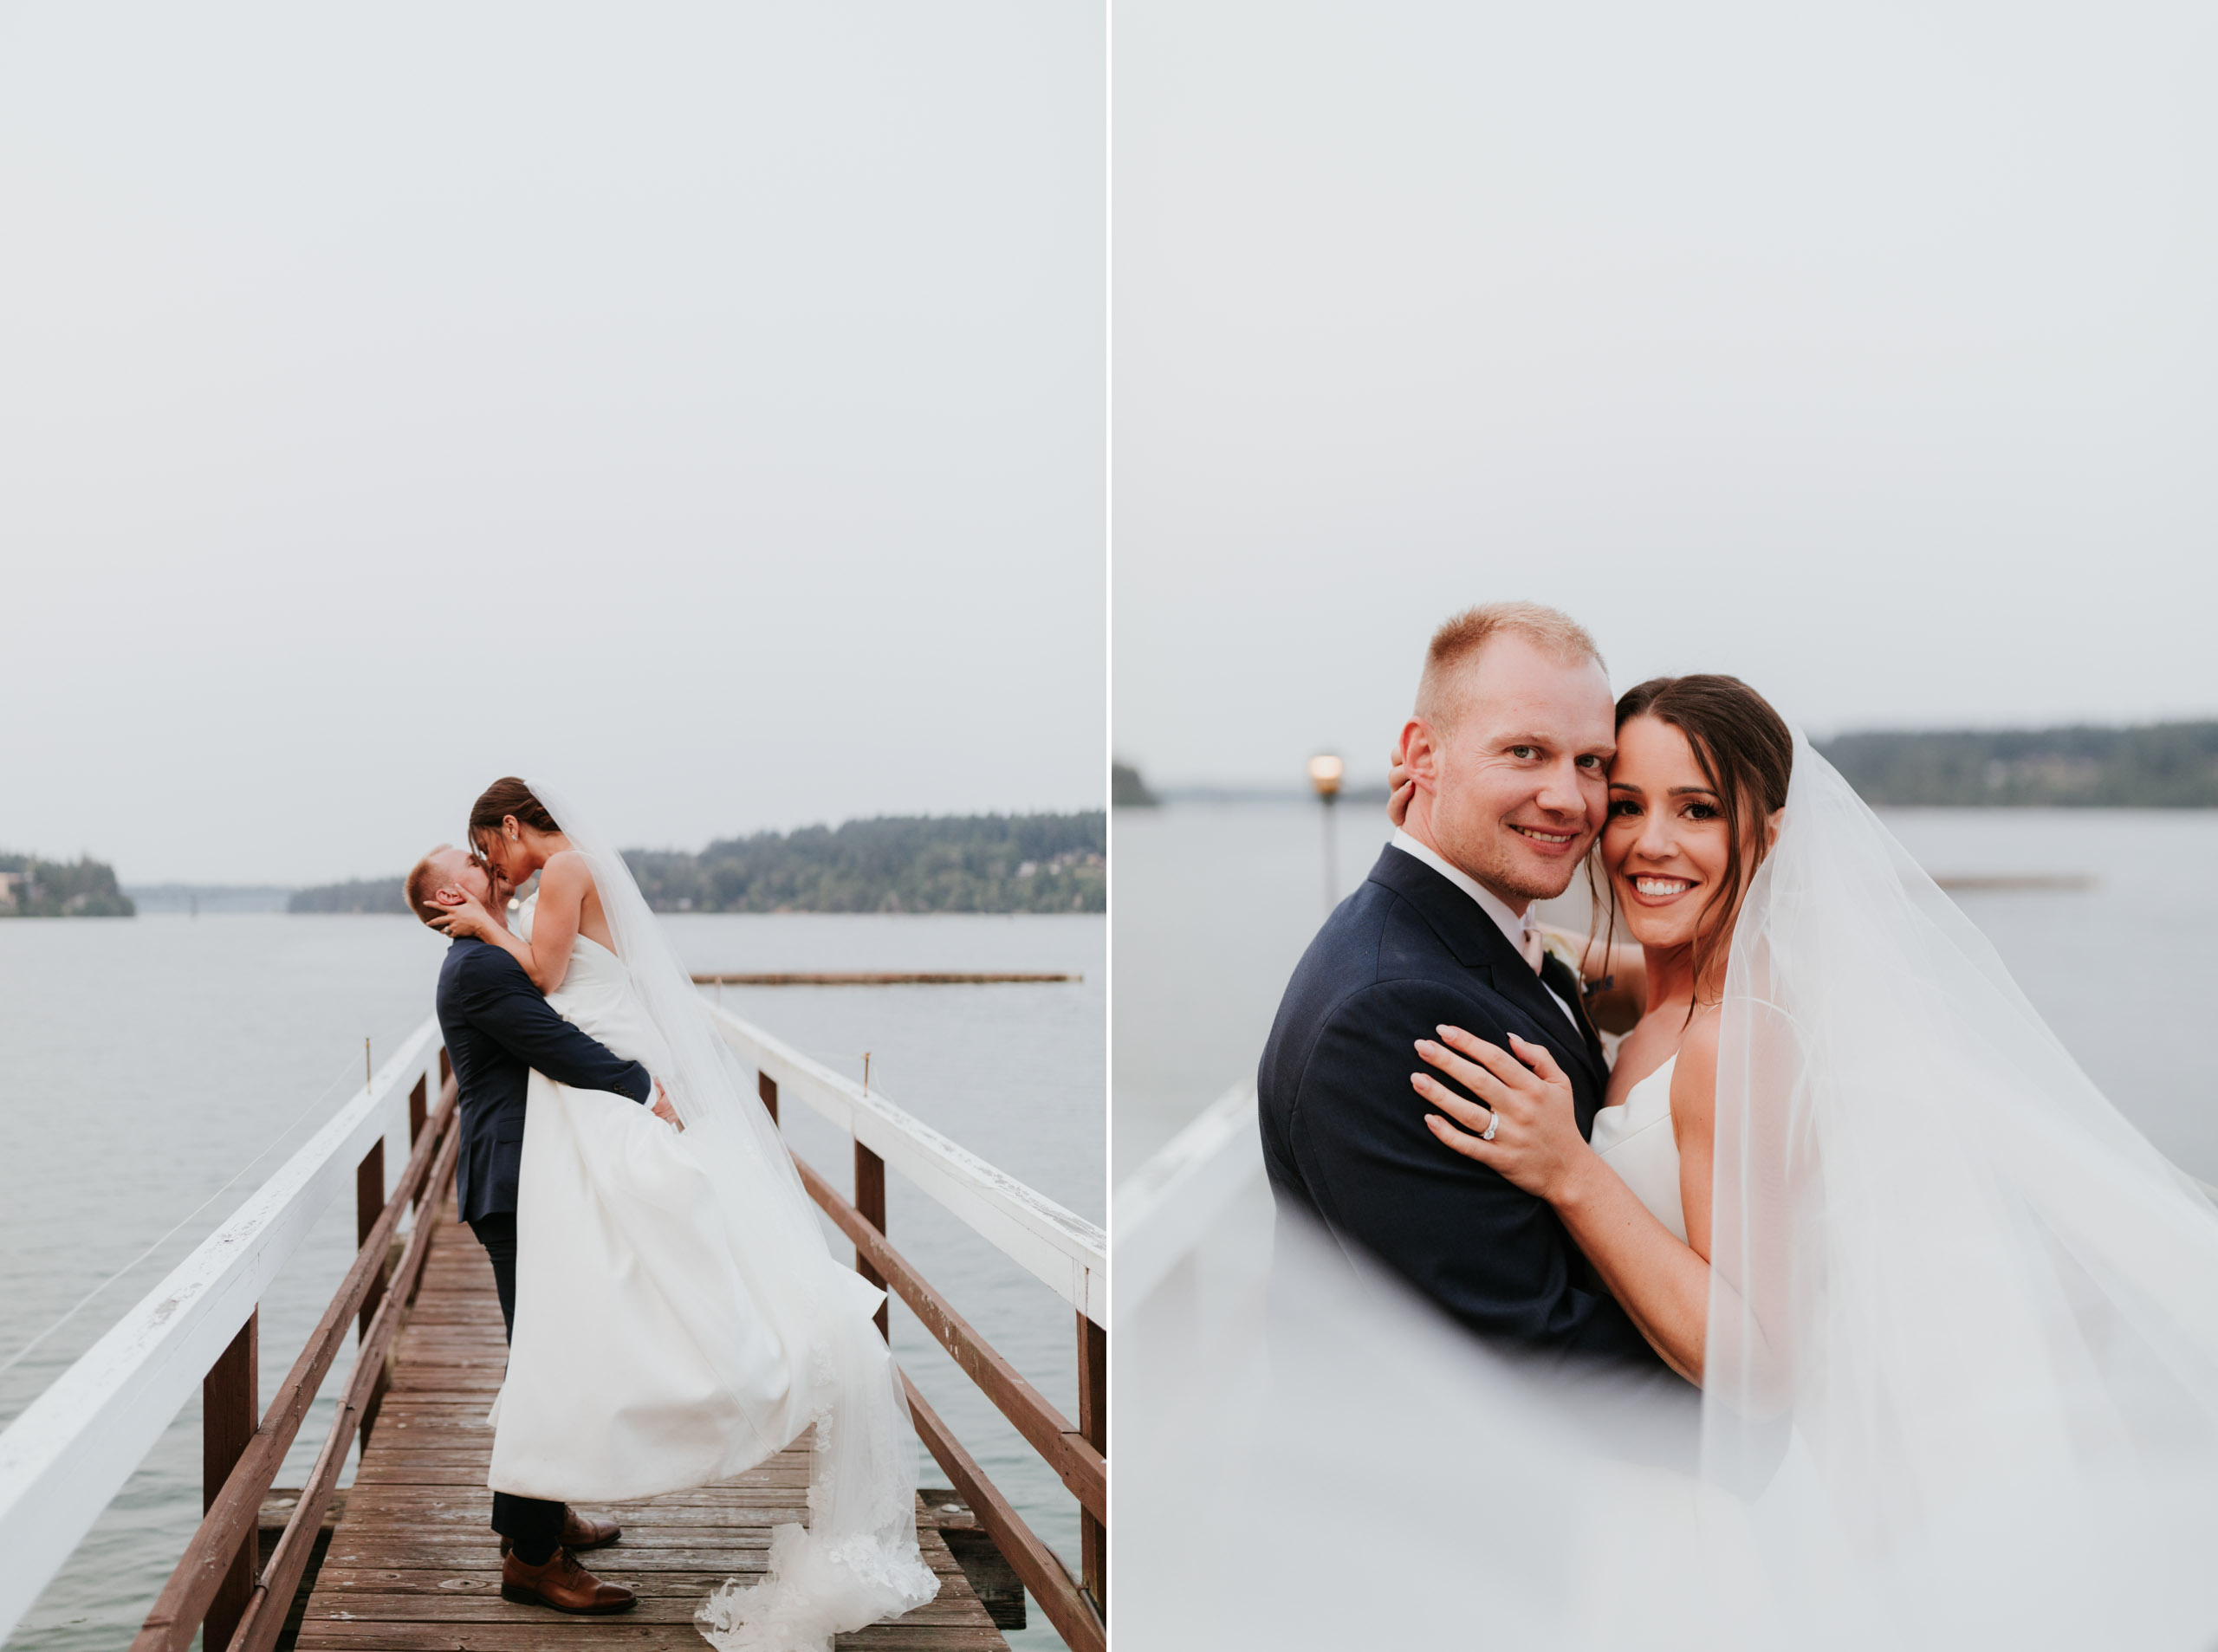 https://breannapluskevin.com/wp-content/uploads/photo-gallery/imported_from_media_libray/kiana-lodge-wedding-bm-breanna-plus-kevin-47.jpg